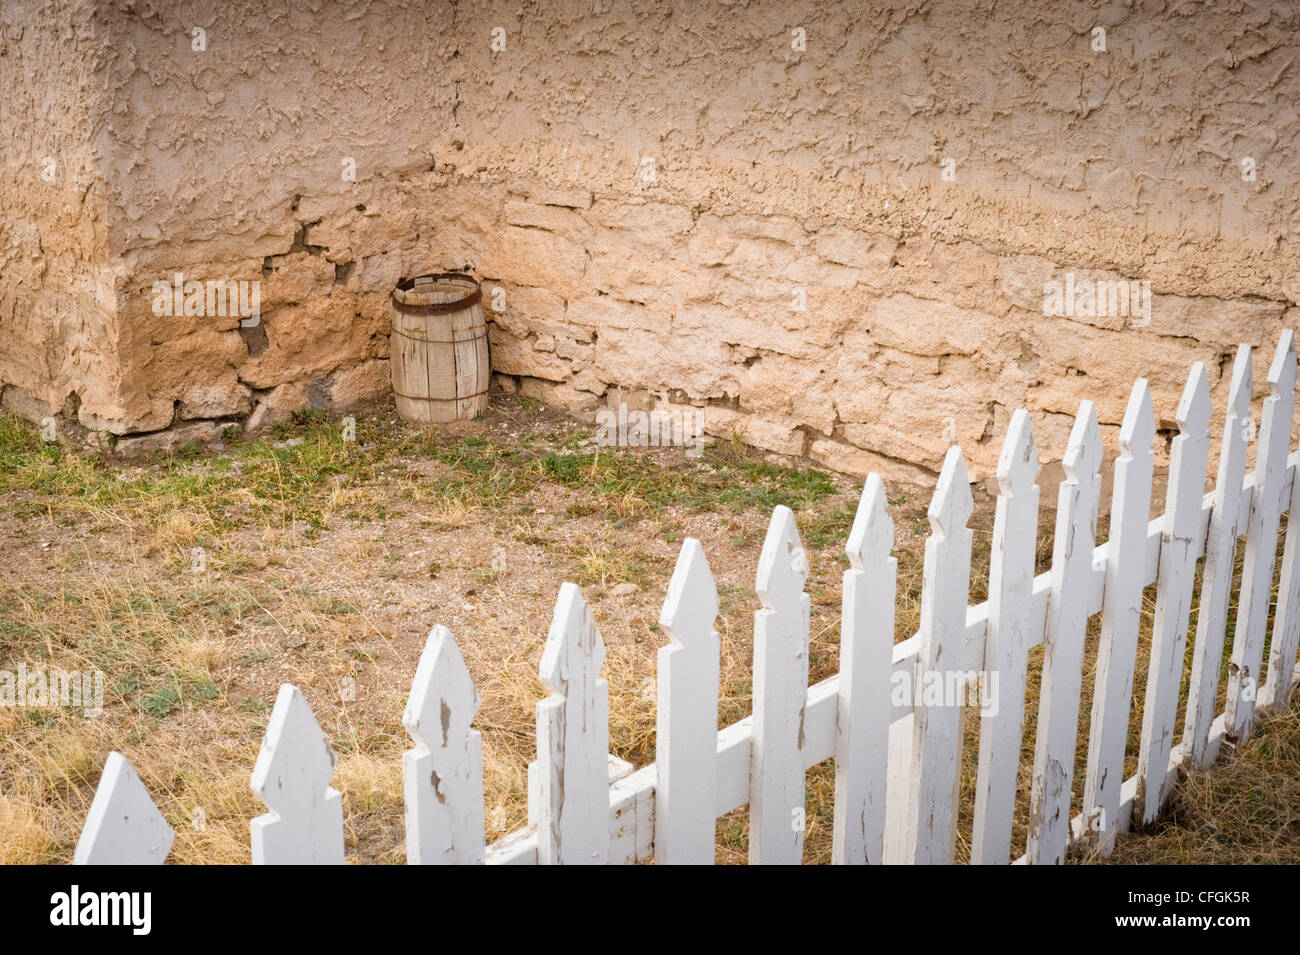 White picket fence and old wooden water barrel in Lincoln, New Mexico. Stock Photo